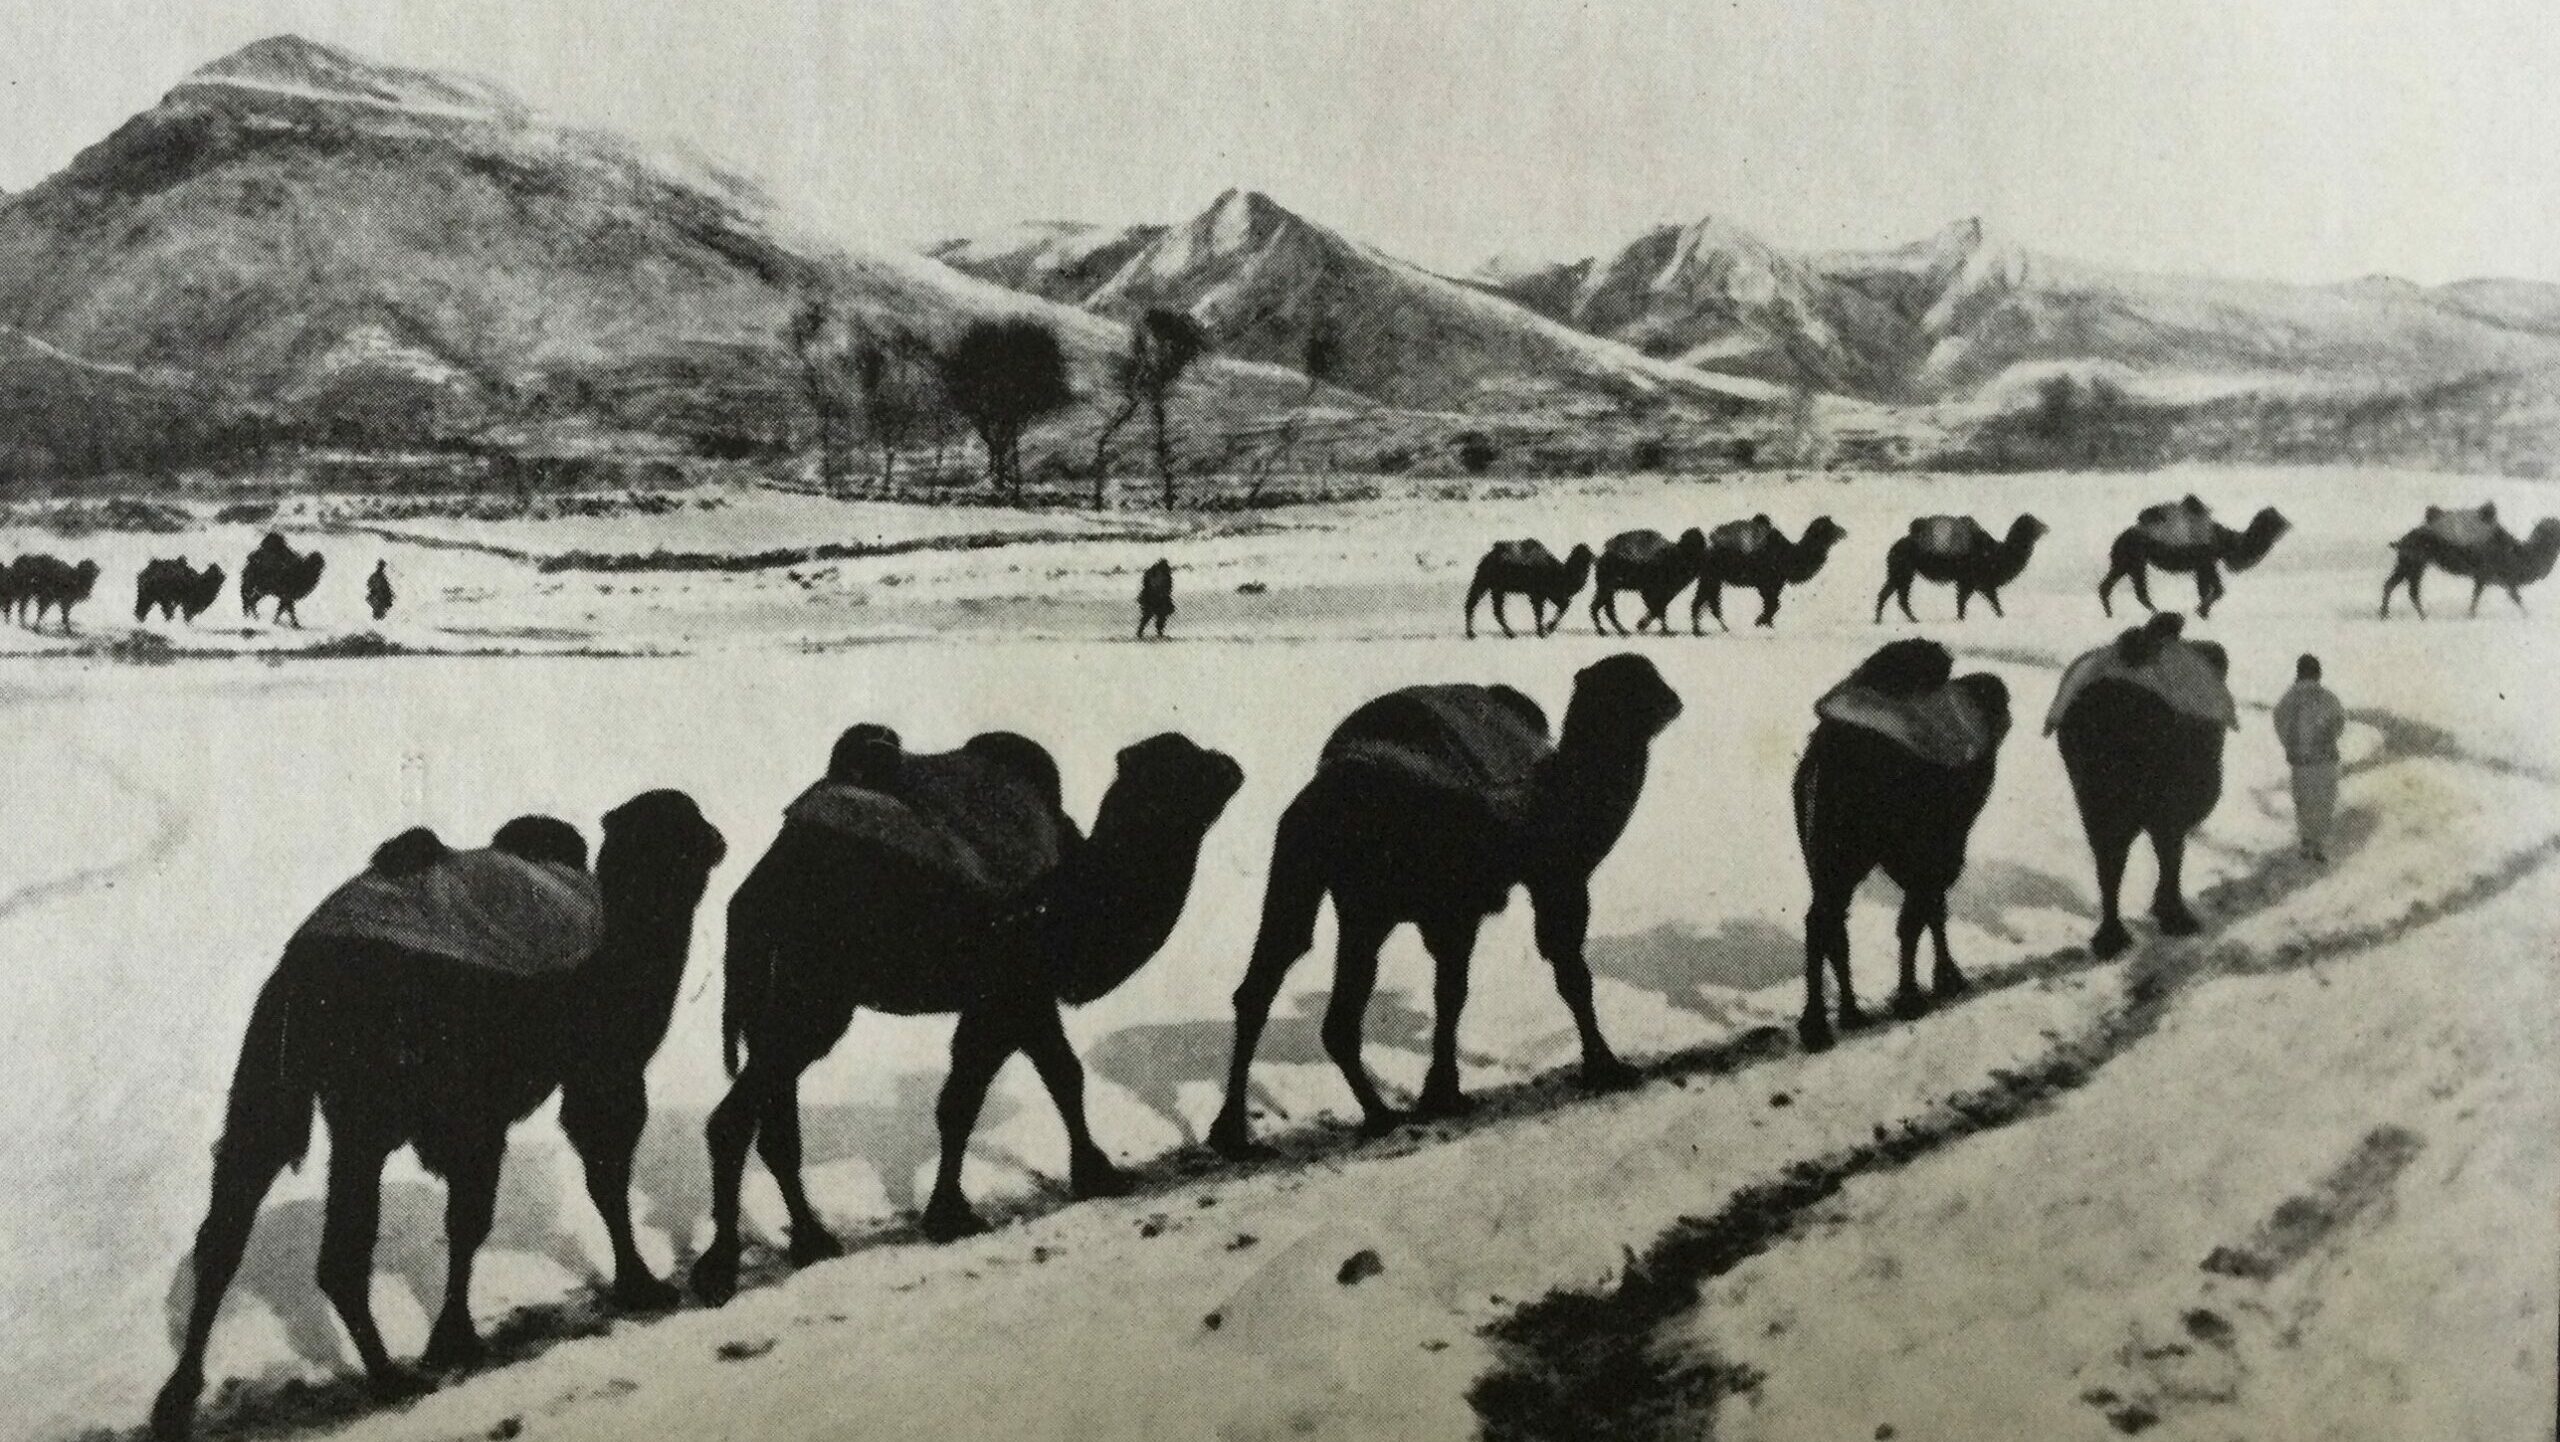 A View from the Hill - Glimpsing the Great Gobi